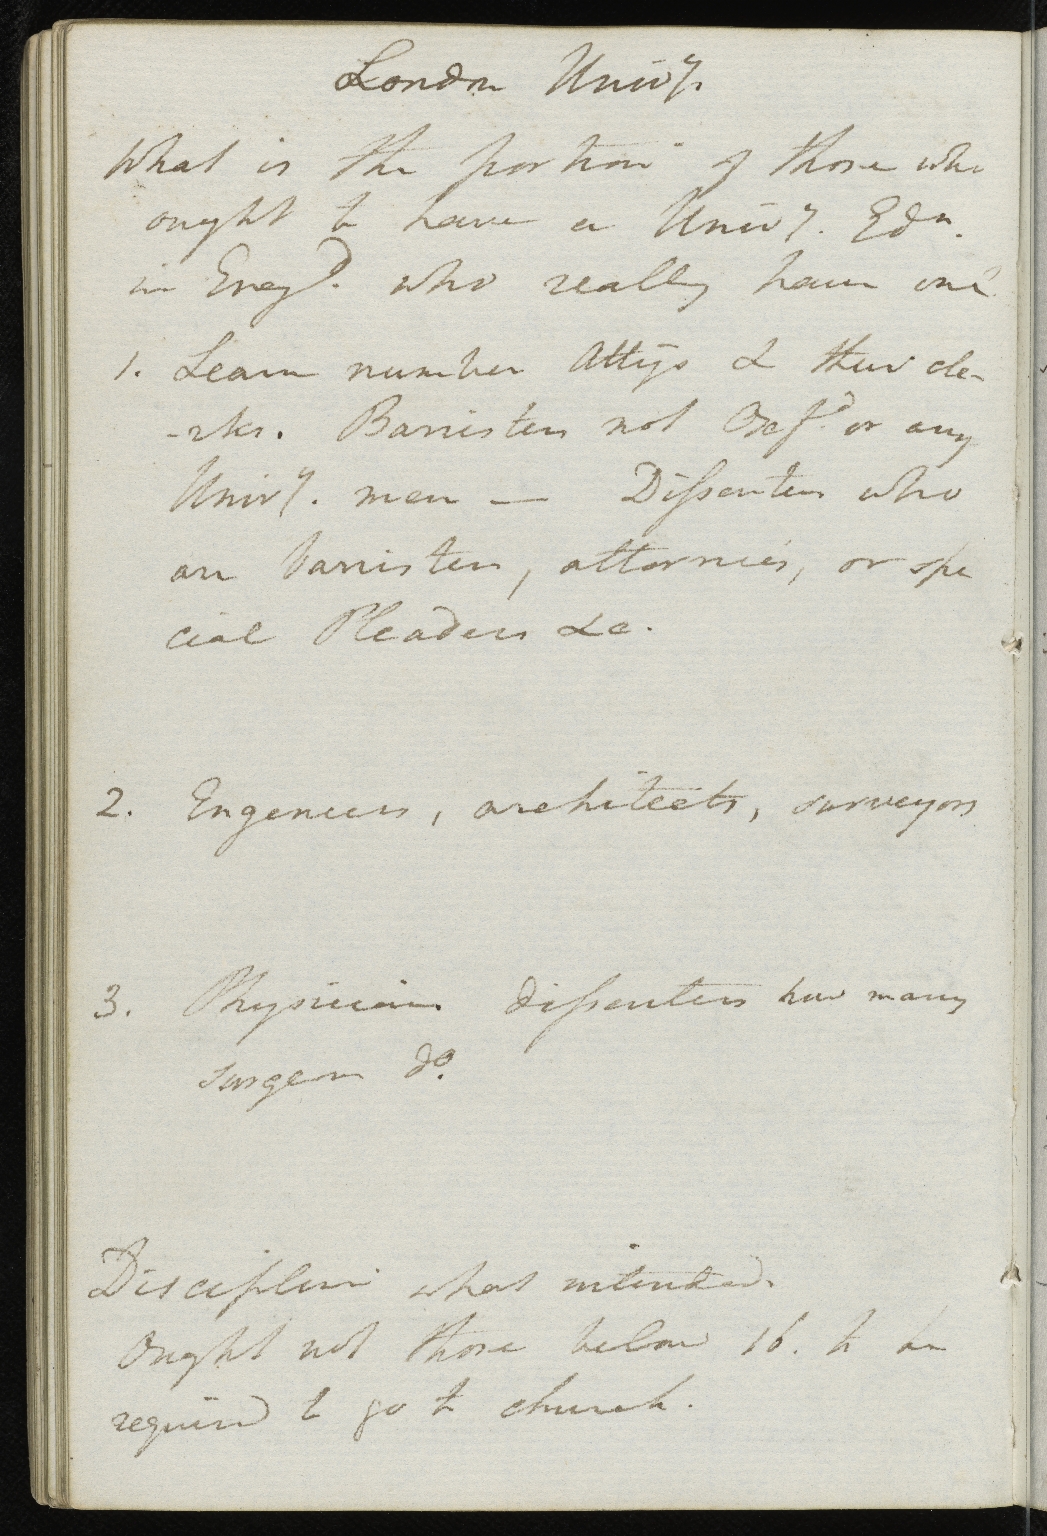 An image of a notebook page written in pencil or light pen in which Charles Lyell writes his thoughts on University education. Transcript: What is the portion of those who ought to have a Univ[ersit]y Ed[ucatio]n in England. Who really have one? 1. Learn number Att[ourn]ys & their cle-rks. Barristers not Oxf[or]d or any Univ[ersit]y men - Dissenter who an barrister, attournies, or spe-cial pleaders &c [etc] 2. Engineers, Architects, Surveyors 3. Physician dissenters how many Surgeon d[itt]o. Discipline was intended. ought not those below 16 to be required to go to church.